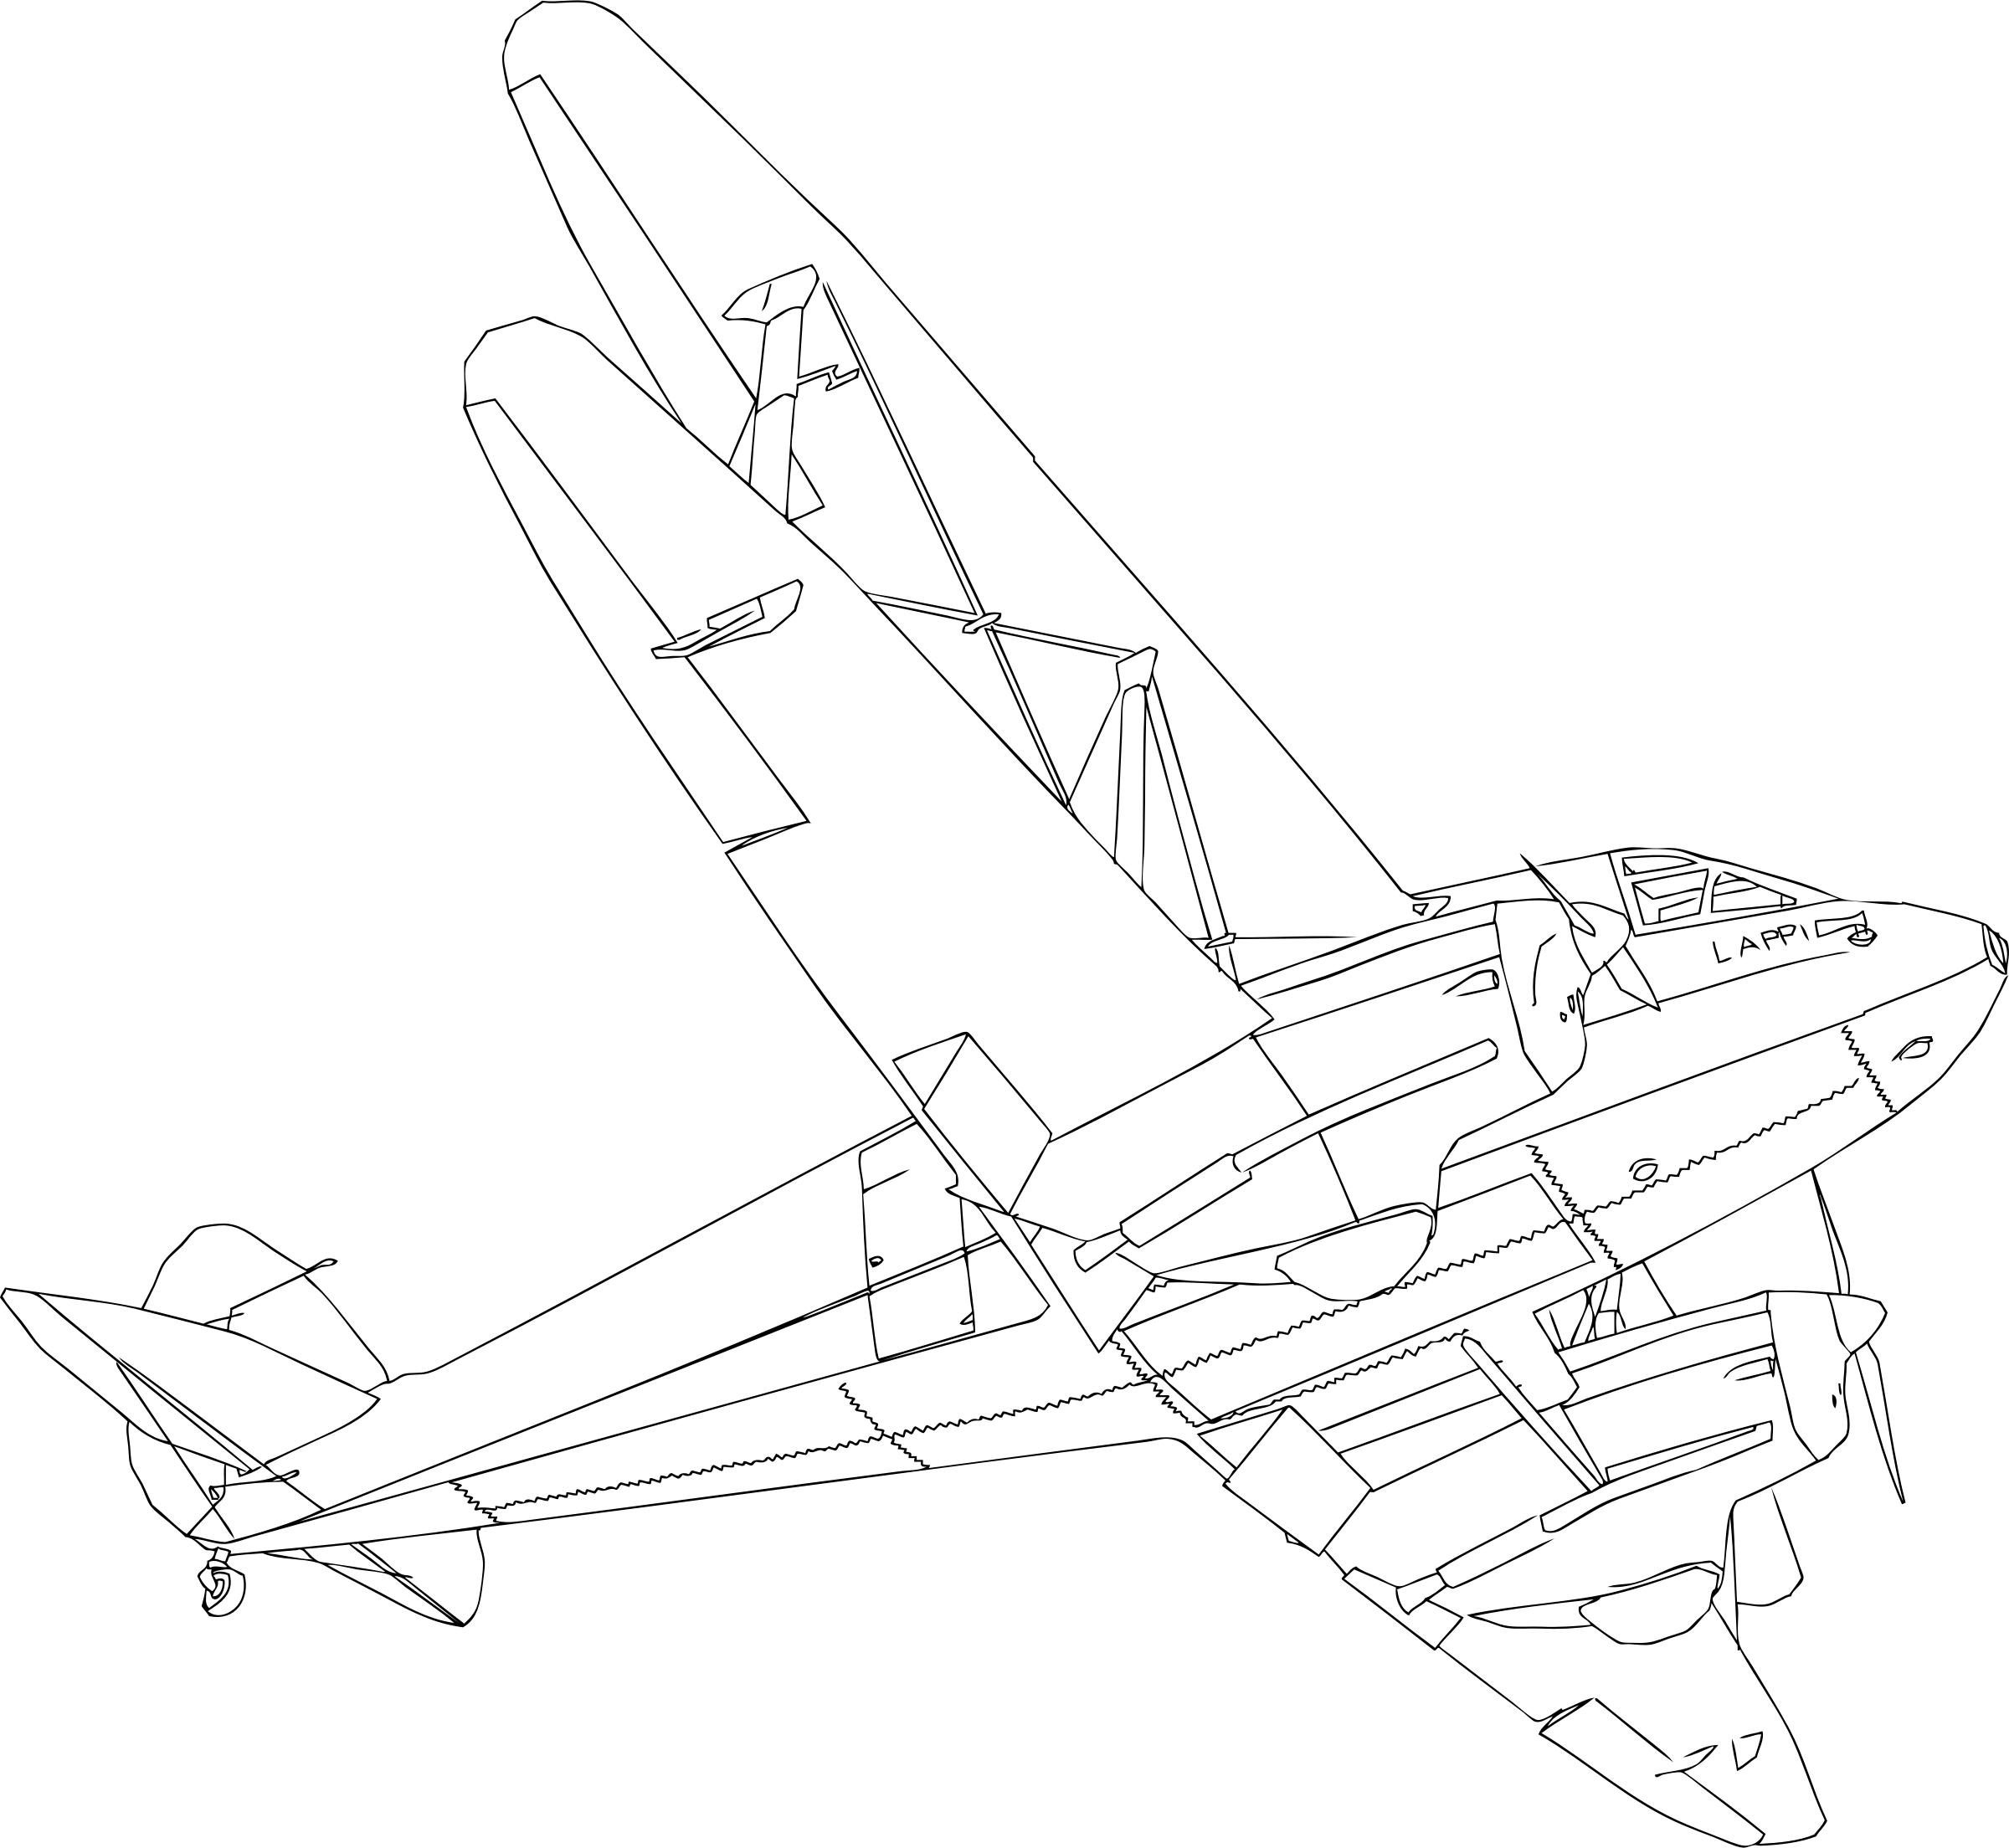 Old airplane (Lappi) png